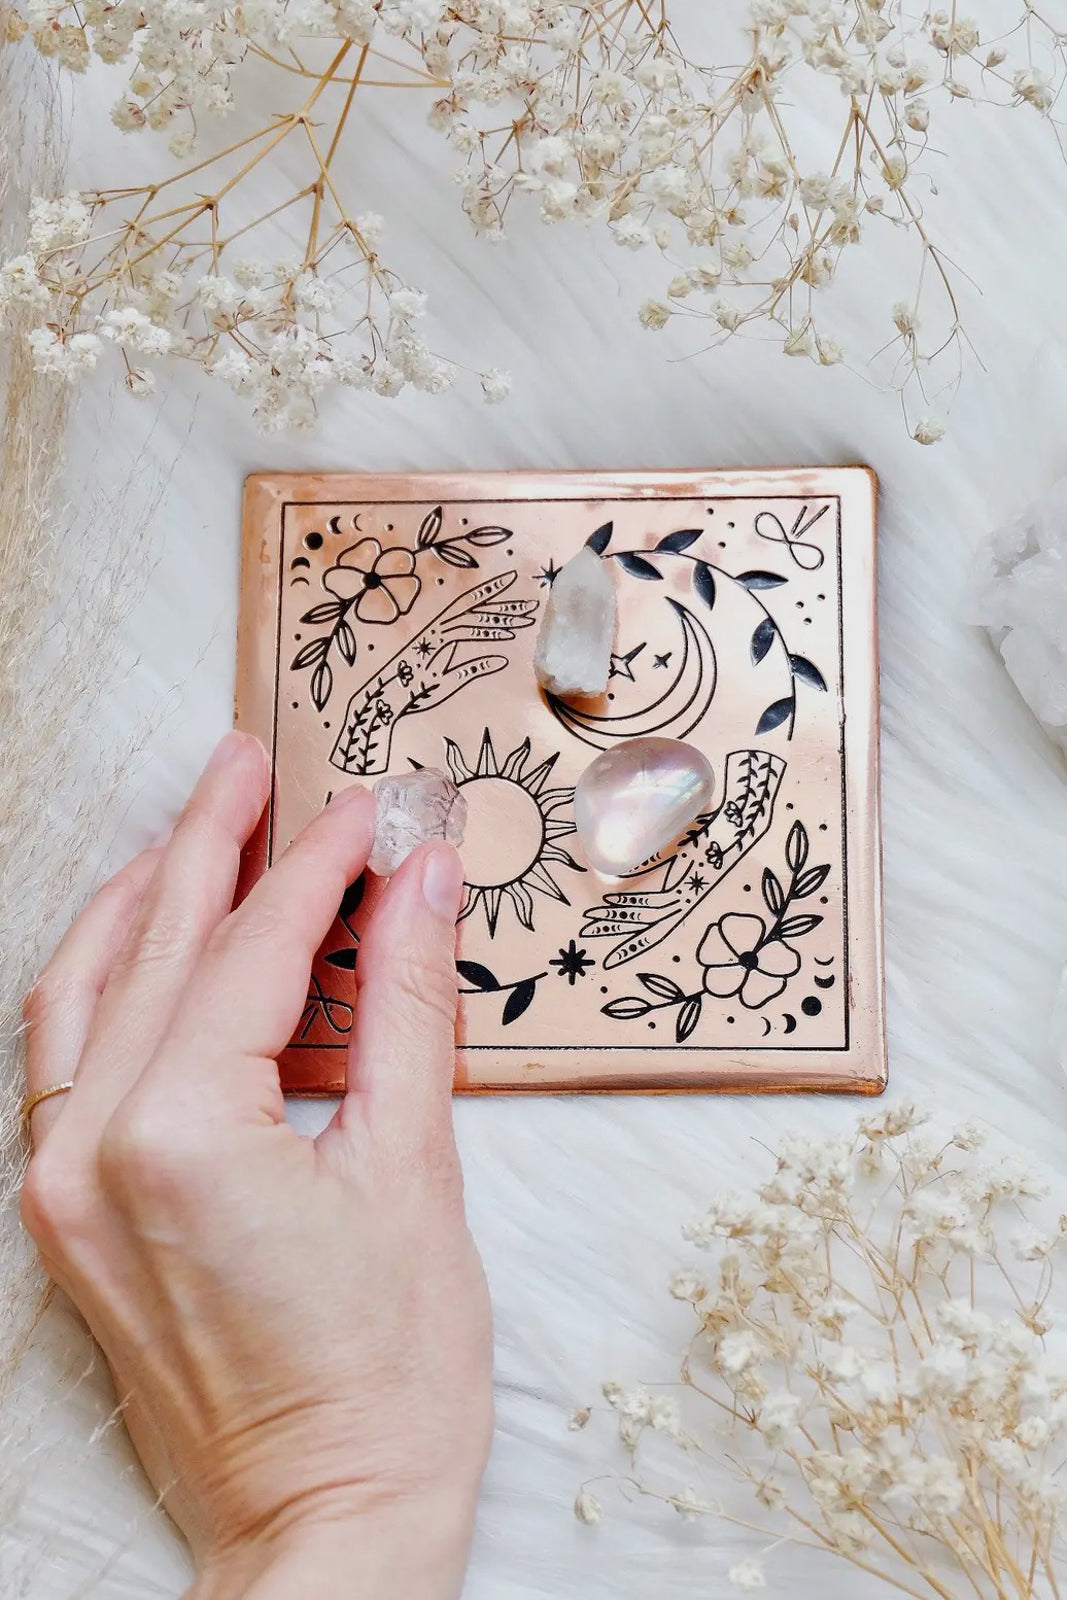 hand places quartz crystals atop a copper plate etched with mystical designs